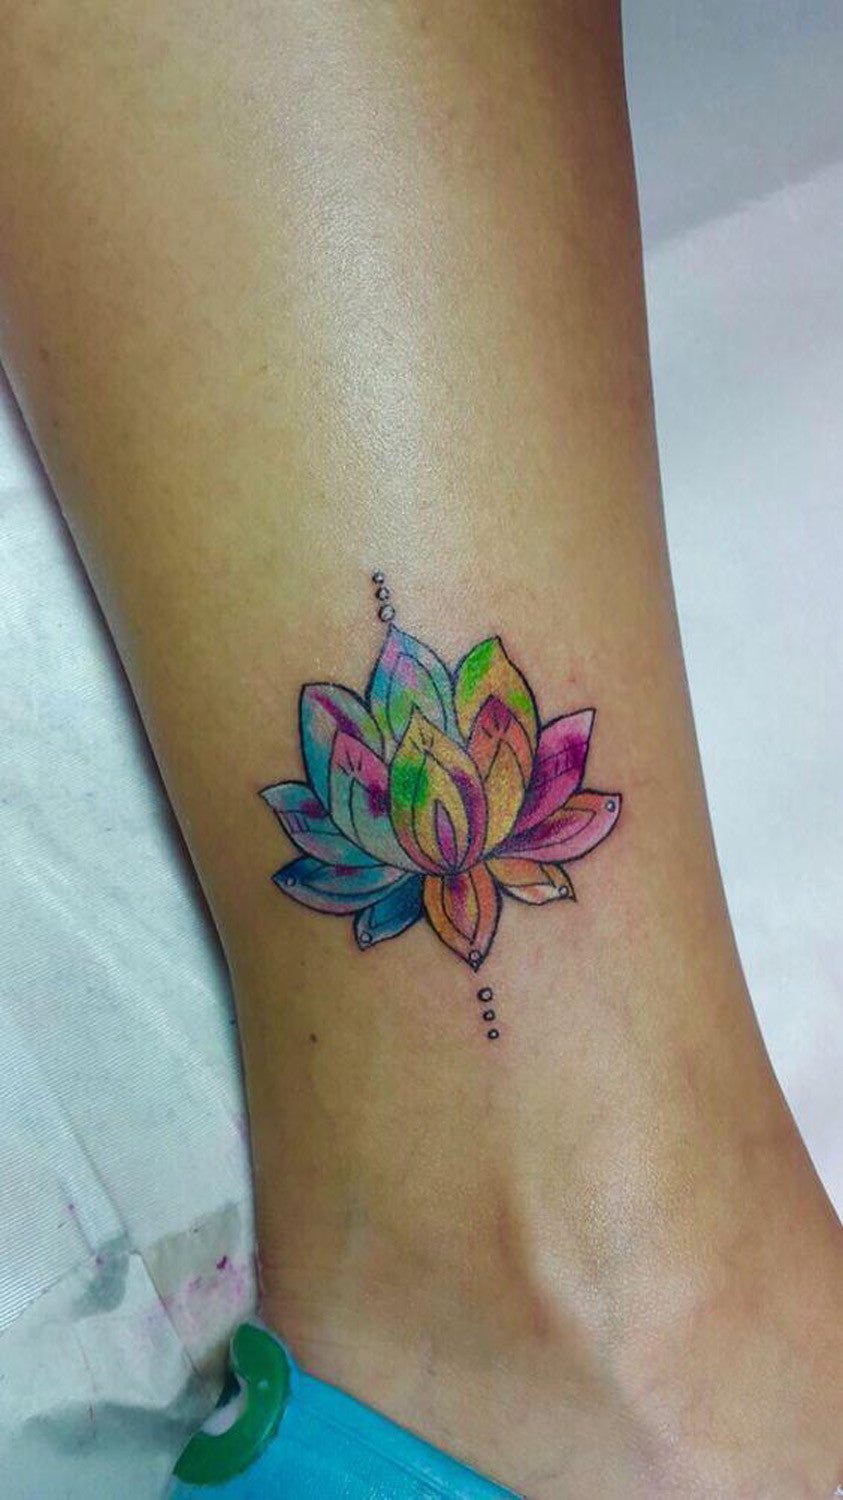 Watercolor Lotus Ankle Tattoo Placement Ideas for Women at MyBodiArt.com